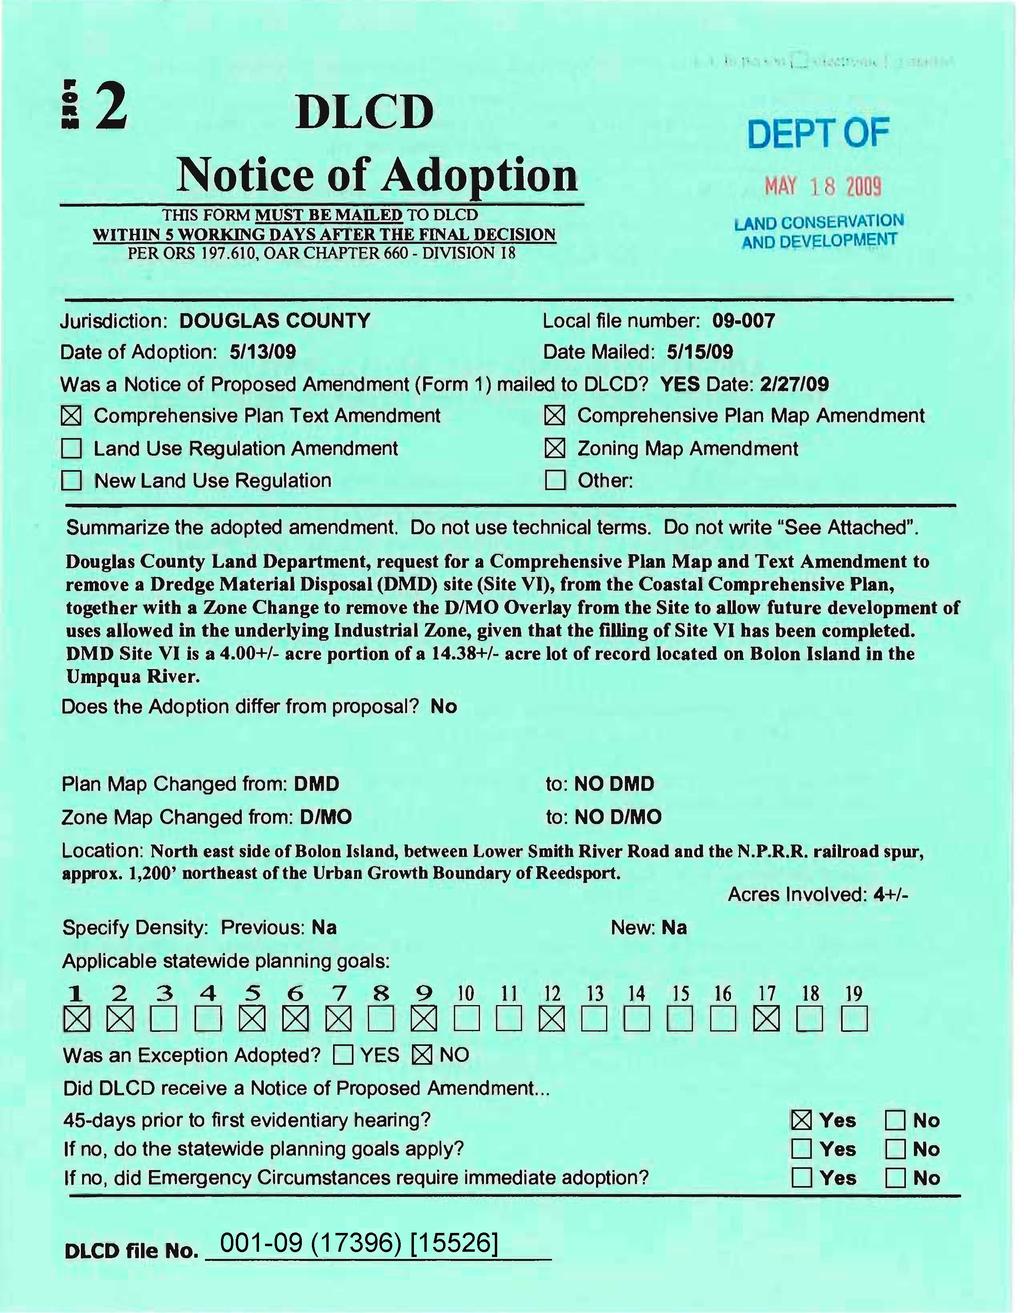 S2 DLCD Notice of Adoption DEPT OF MAY 1 8 2009 THIS FORM MUST BE MAILED TO DLCD WITHIN S WORKING DAYS AFTER THE FINAL DECISION PERORS 197.